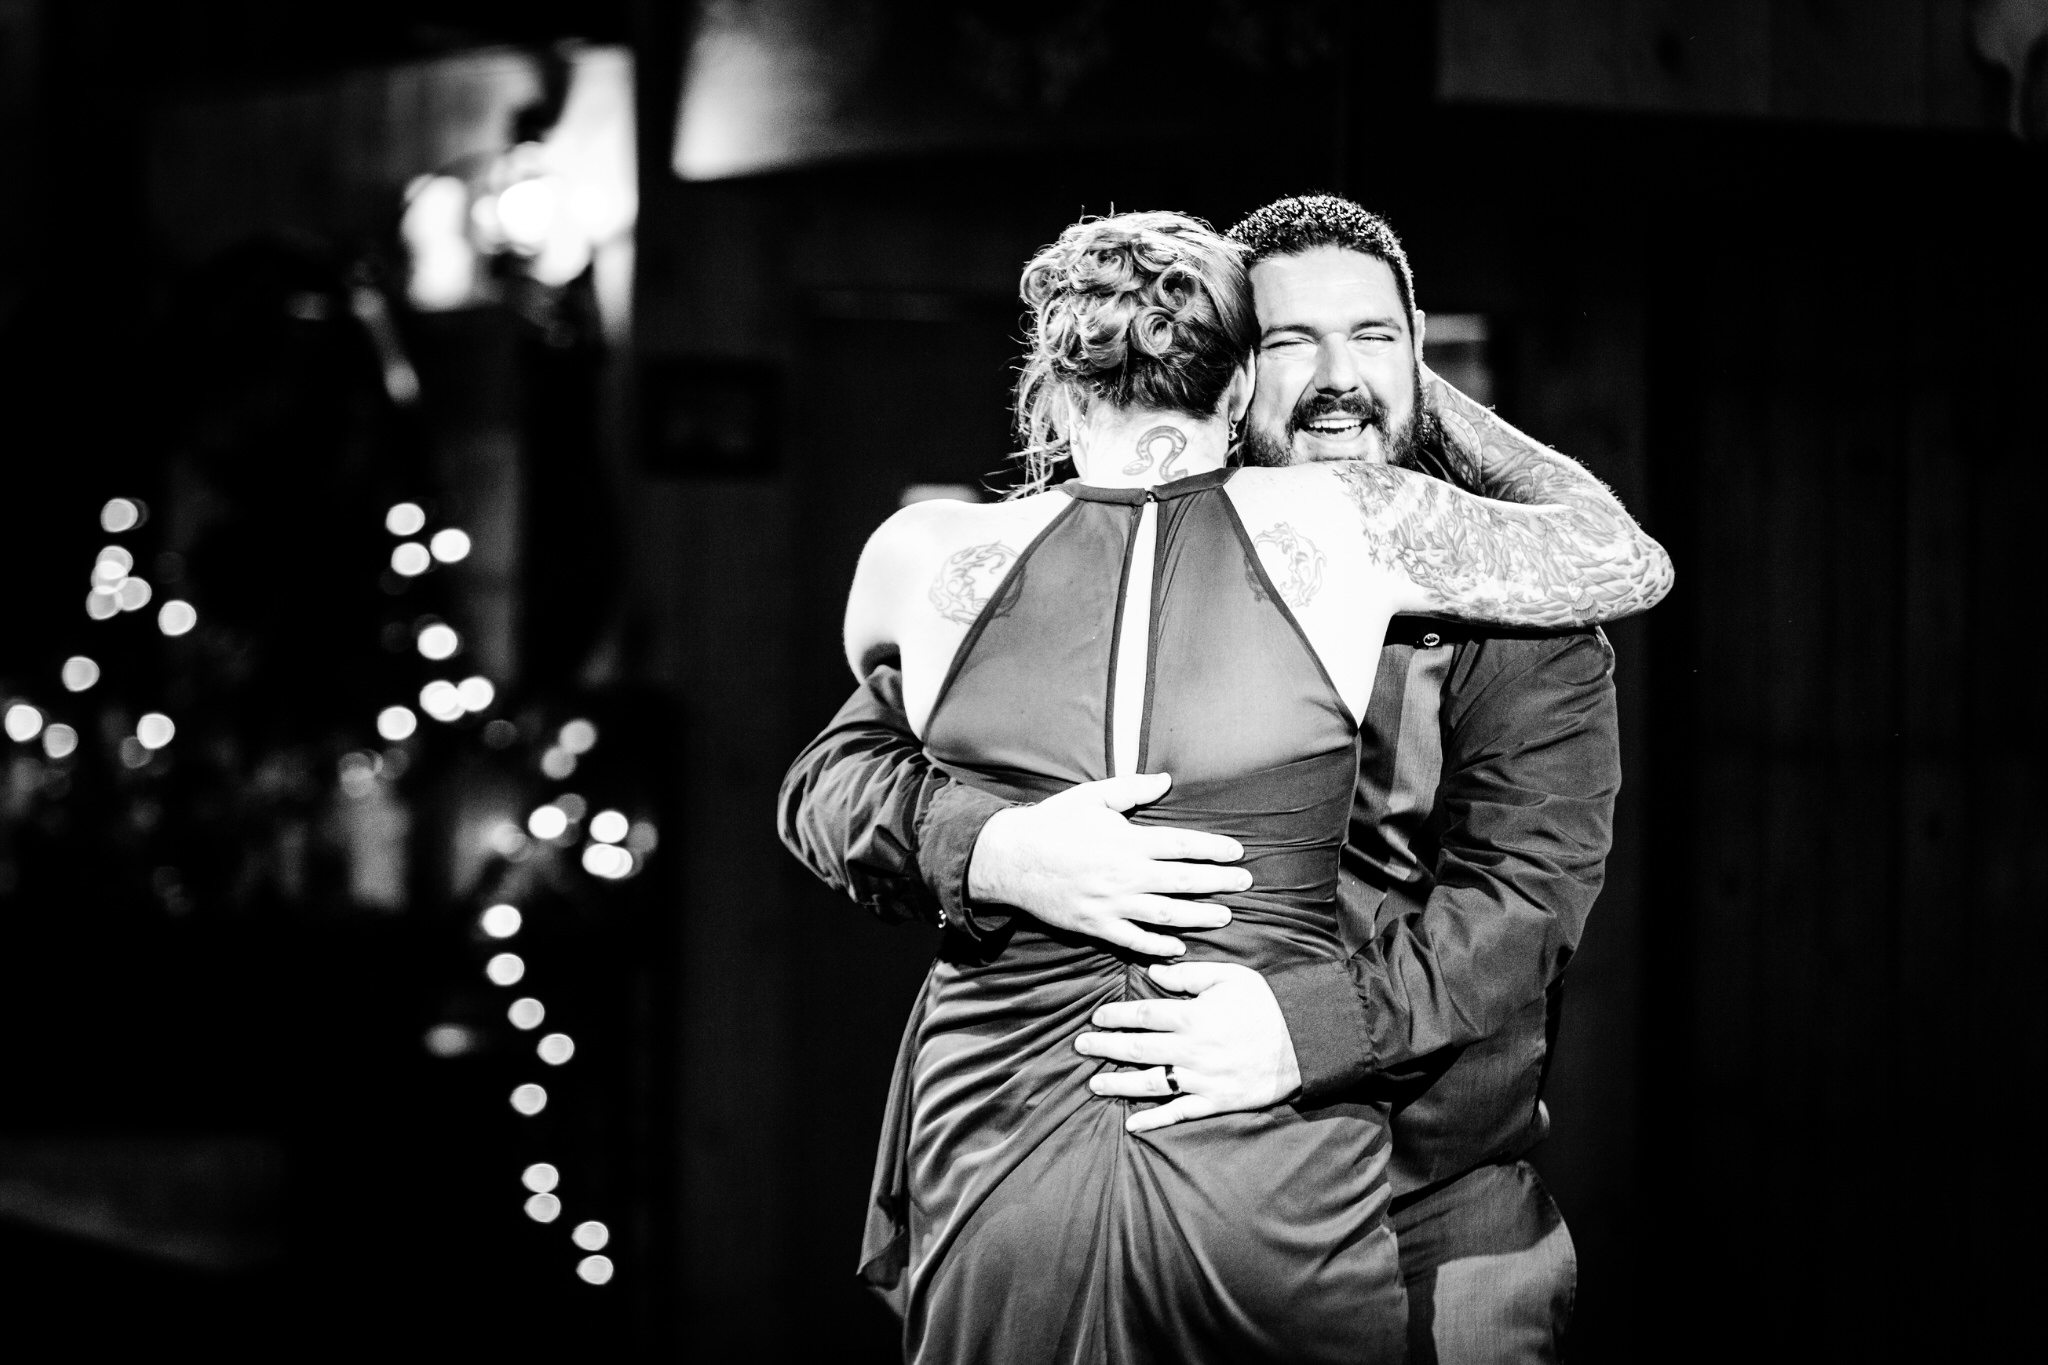 The groom hugging his sister after their dance during the reception. Briana and Kevin's Terry Bison Ranch Wedding by Wyoming Wedding Photographer Jennifer Garza, Wyoming Wedding, Wyoming Wedding Photographer, Wyoming Engagement Photographer, Wyoming Bride, Couples Goals, Wyoming Wedding, Wedding Photographer, Wyoming Photographer, Wyoming Wedding Photography, Wedding Inspiration, Destination Wedding Photographer, Fall Wedding, Ranch Wedding, Rustic Wedding Inspiration, Wedding Dress Inspo